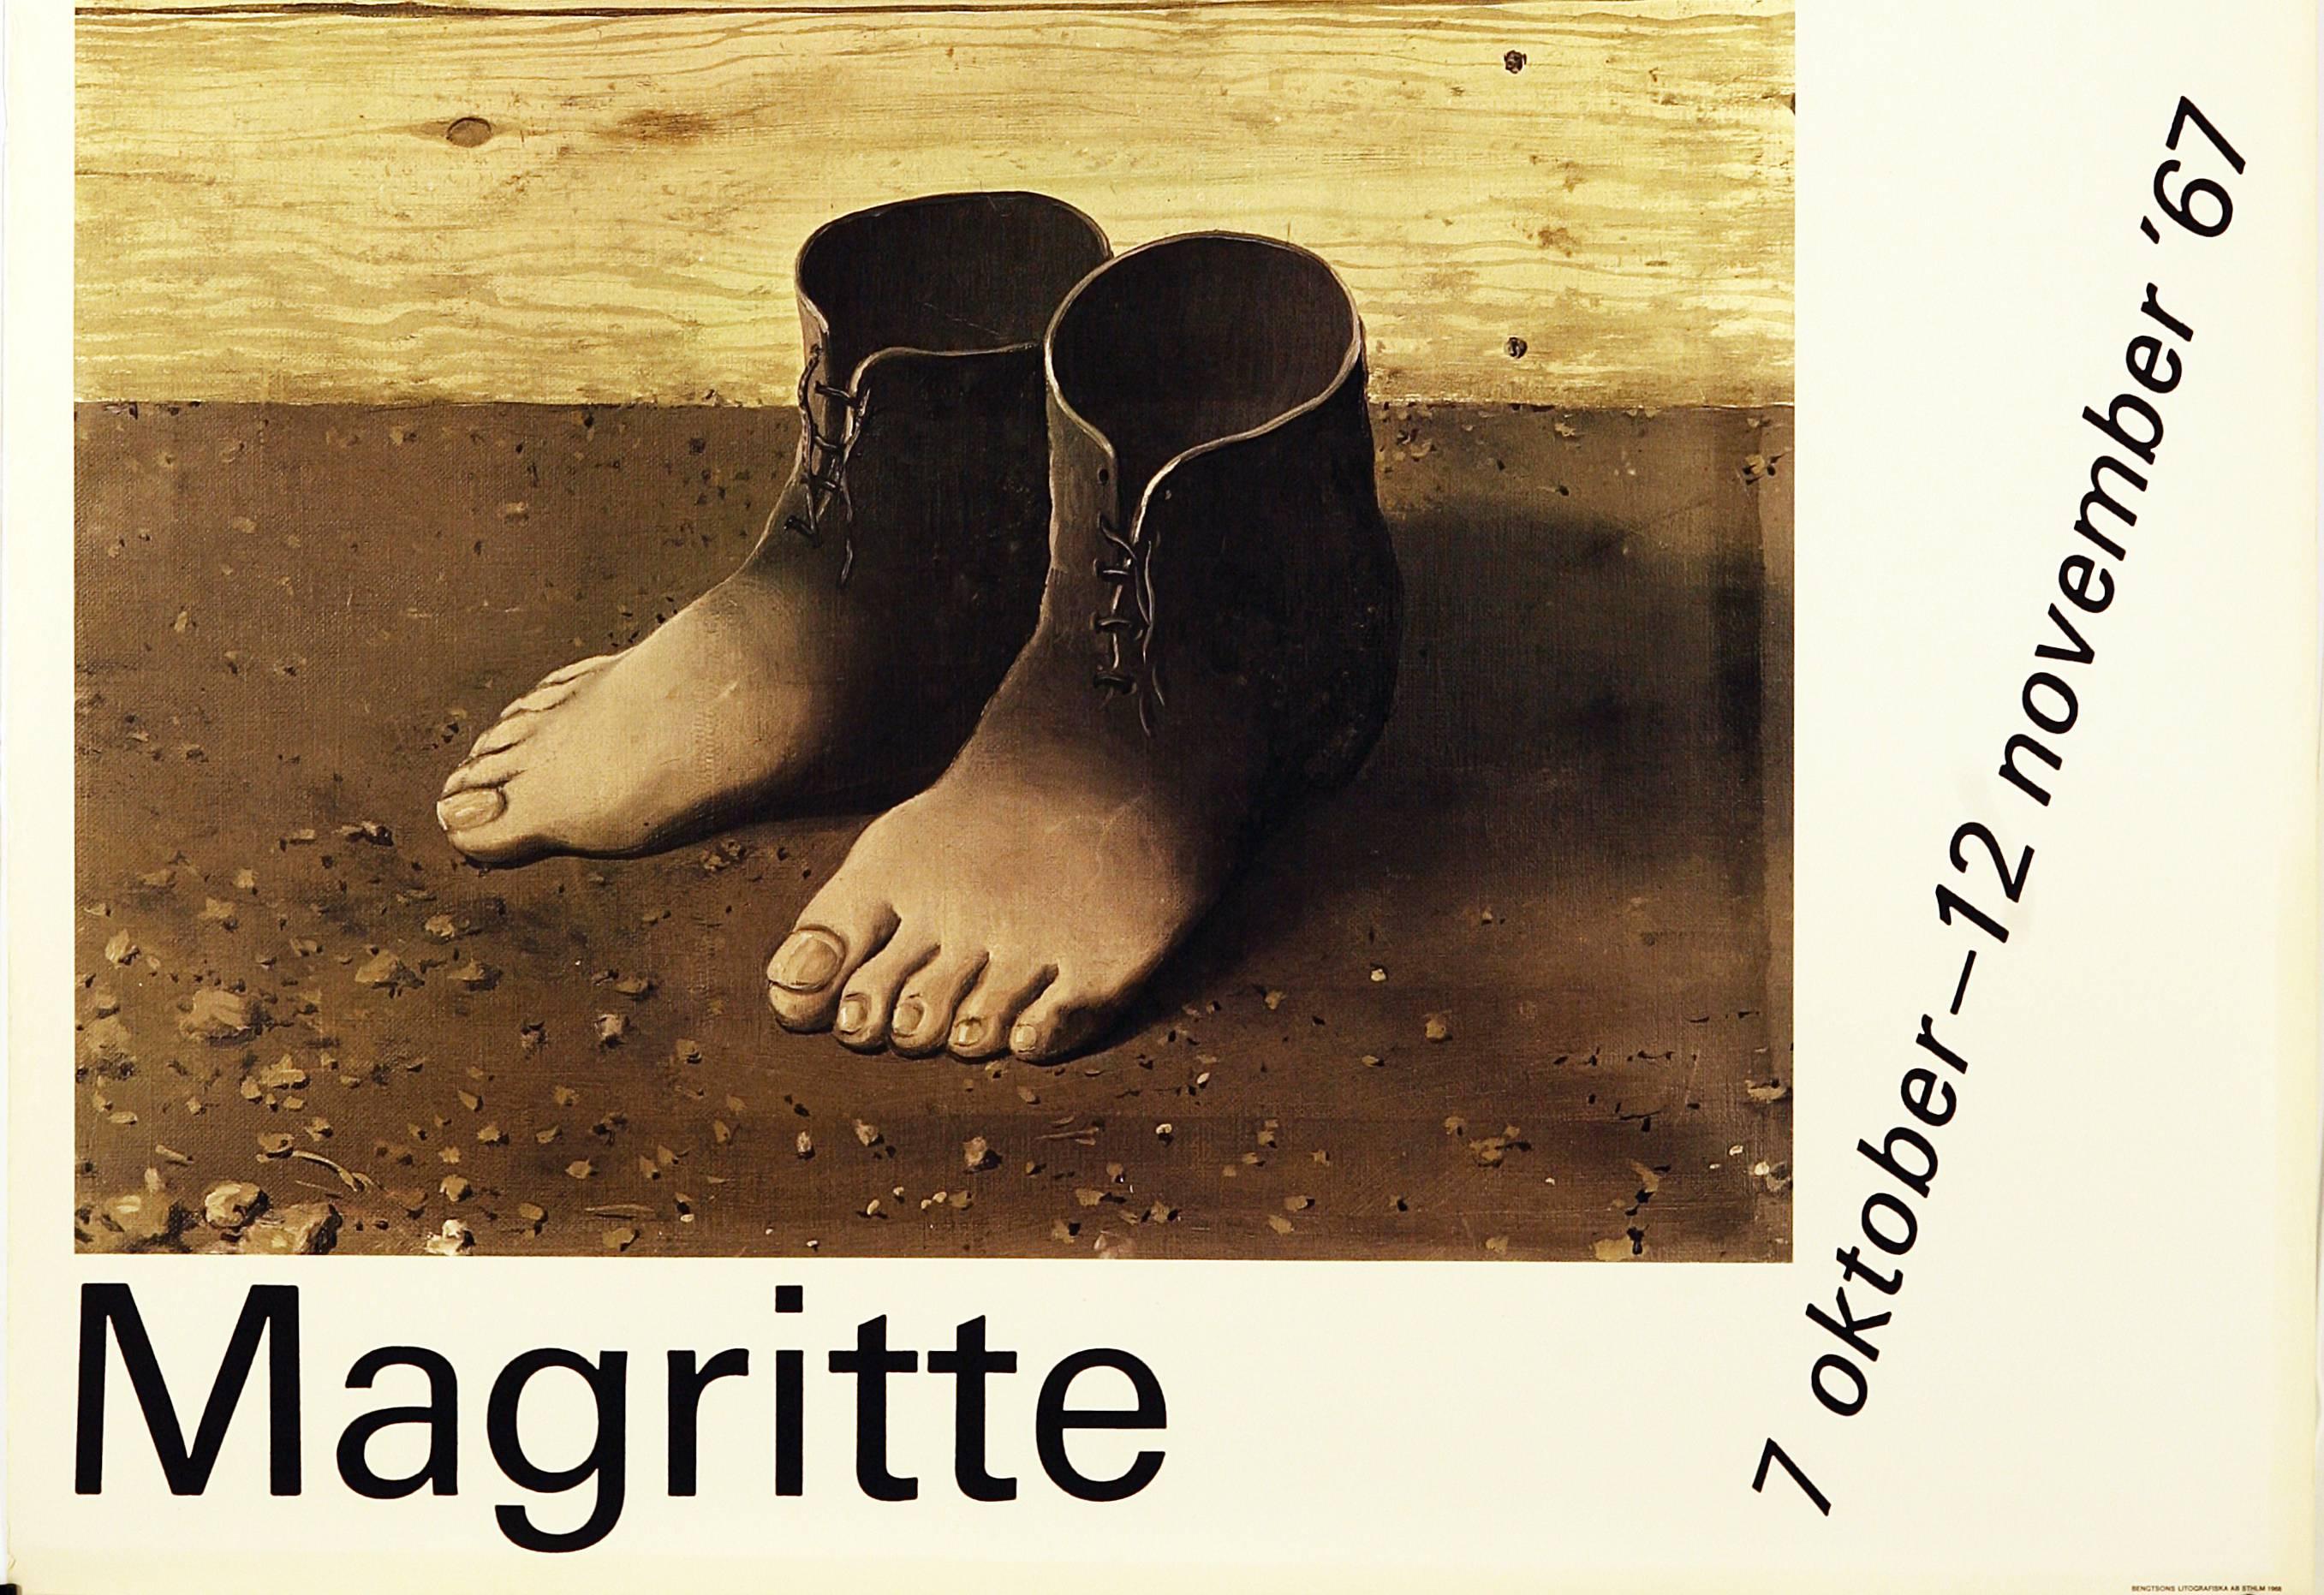 magritte exhibition poster